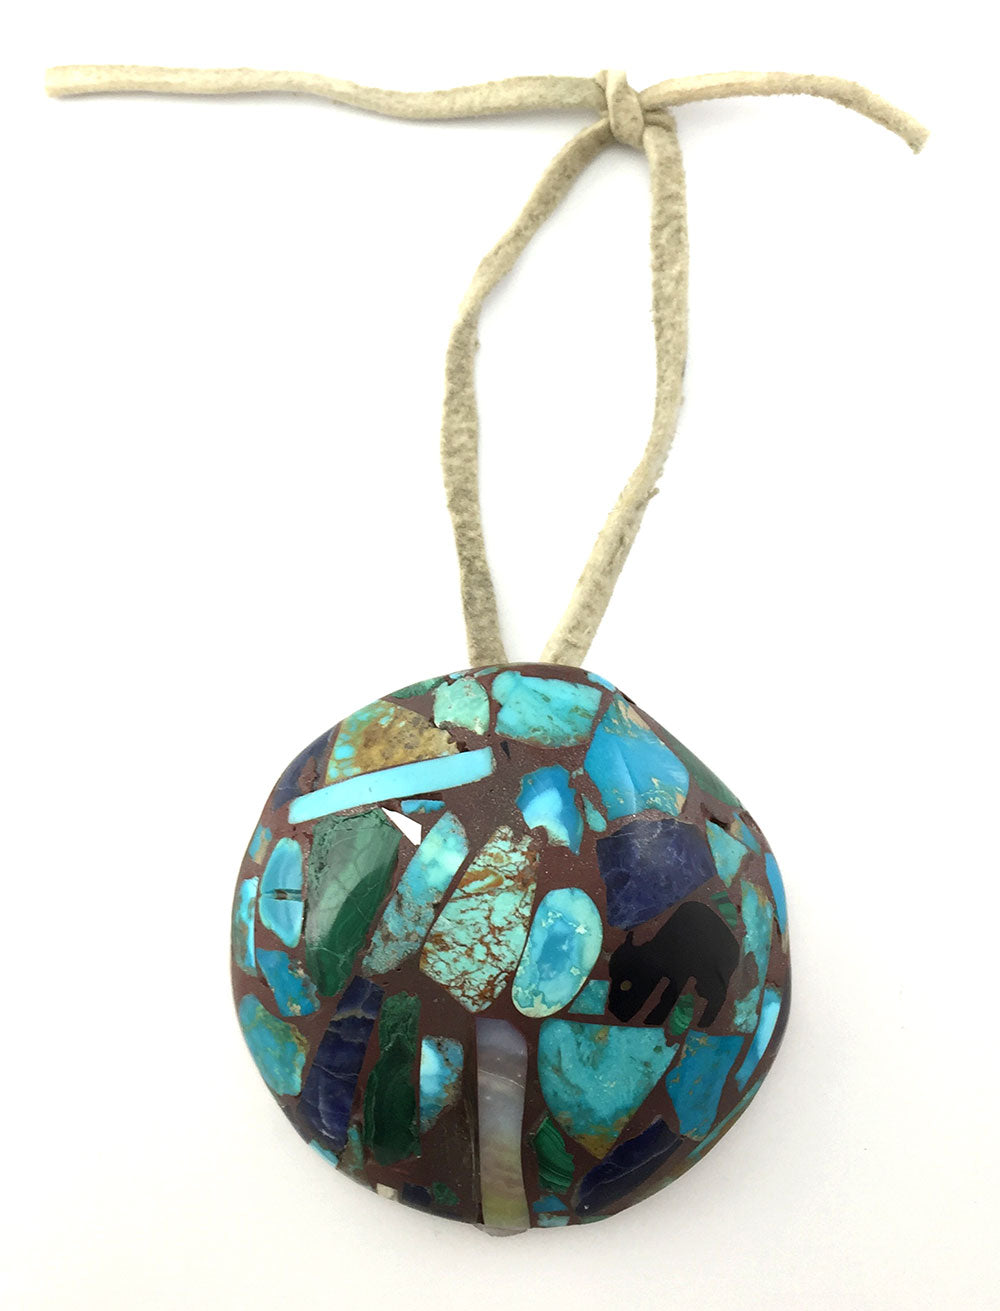 Santo Domingo (Kewa) Turquoise, Malachite, Mother of Pearl, and Lapis Inlay Shell Pendant with Leather Bale, c. 1960s, 3" x 3" (J6012)